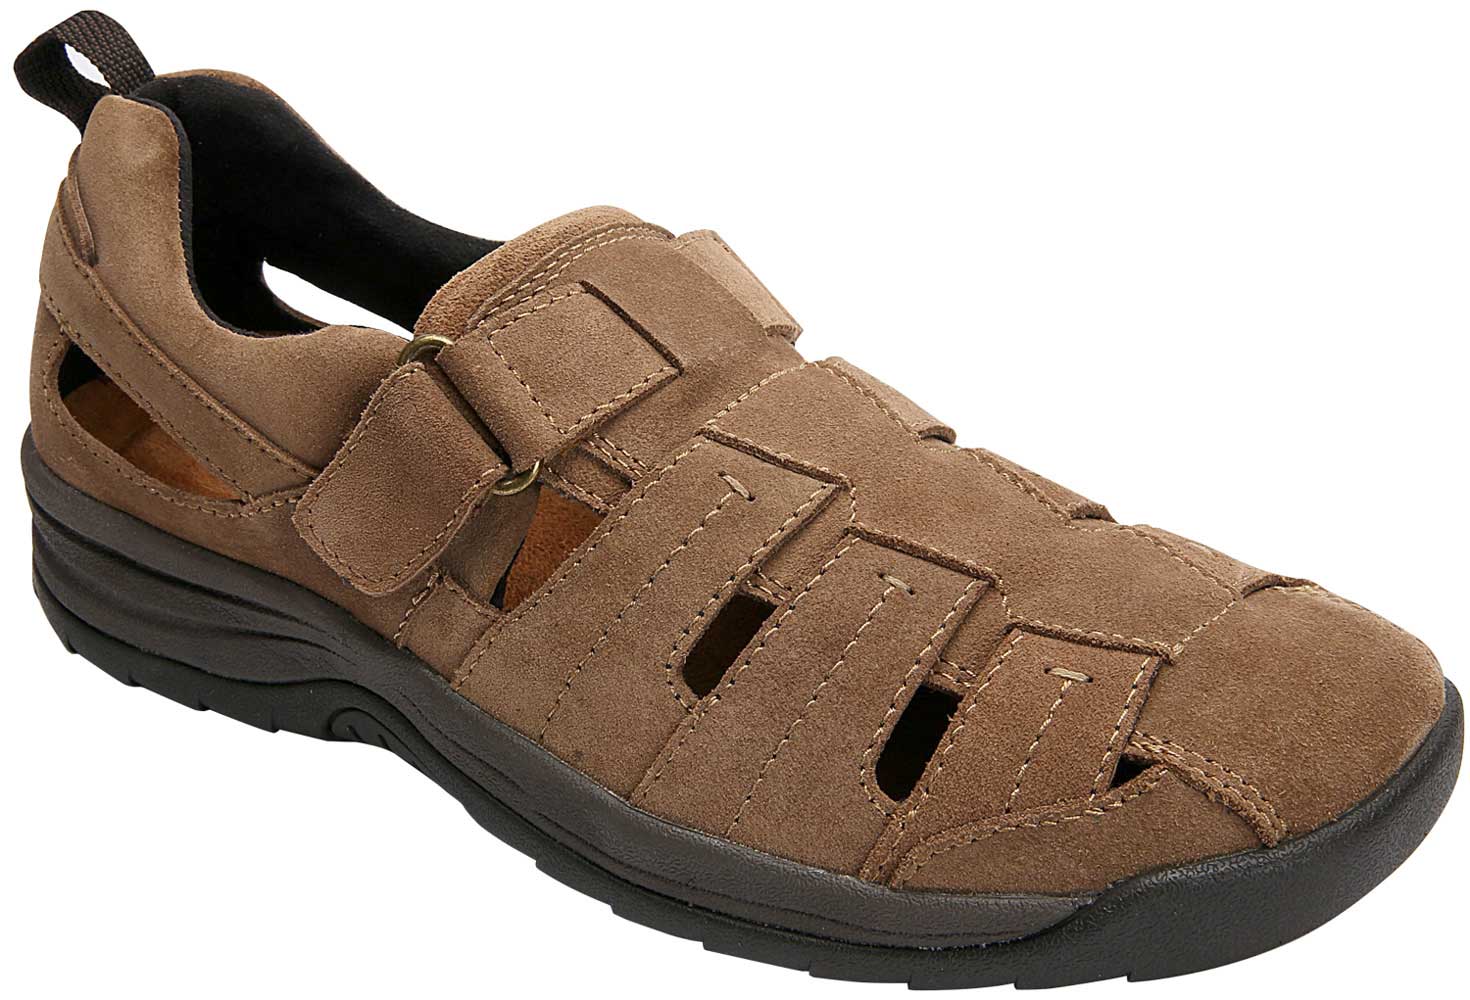 Drew Shoes Dublin Smooth 47717 - Men's Casual Comfort Therapeutic Sandal